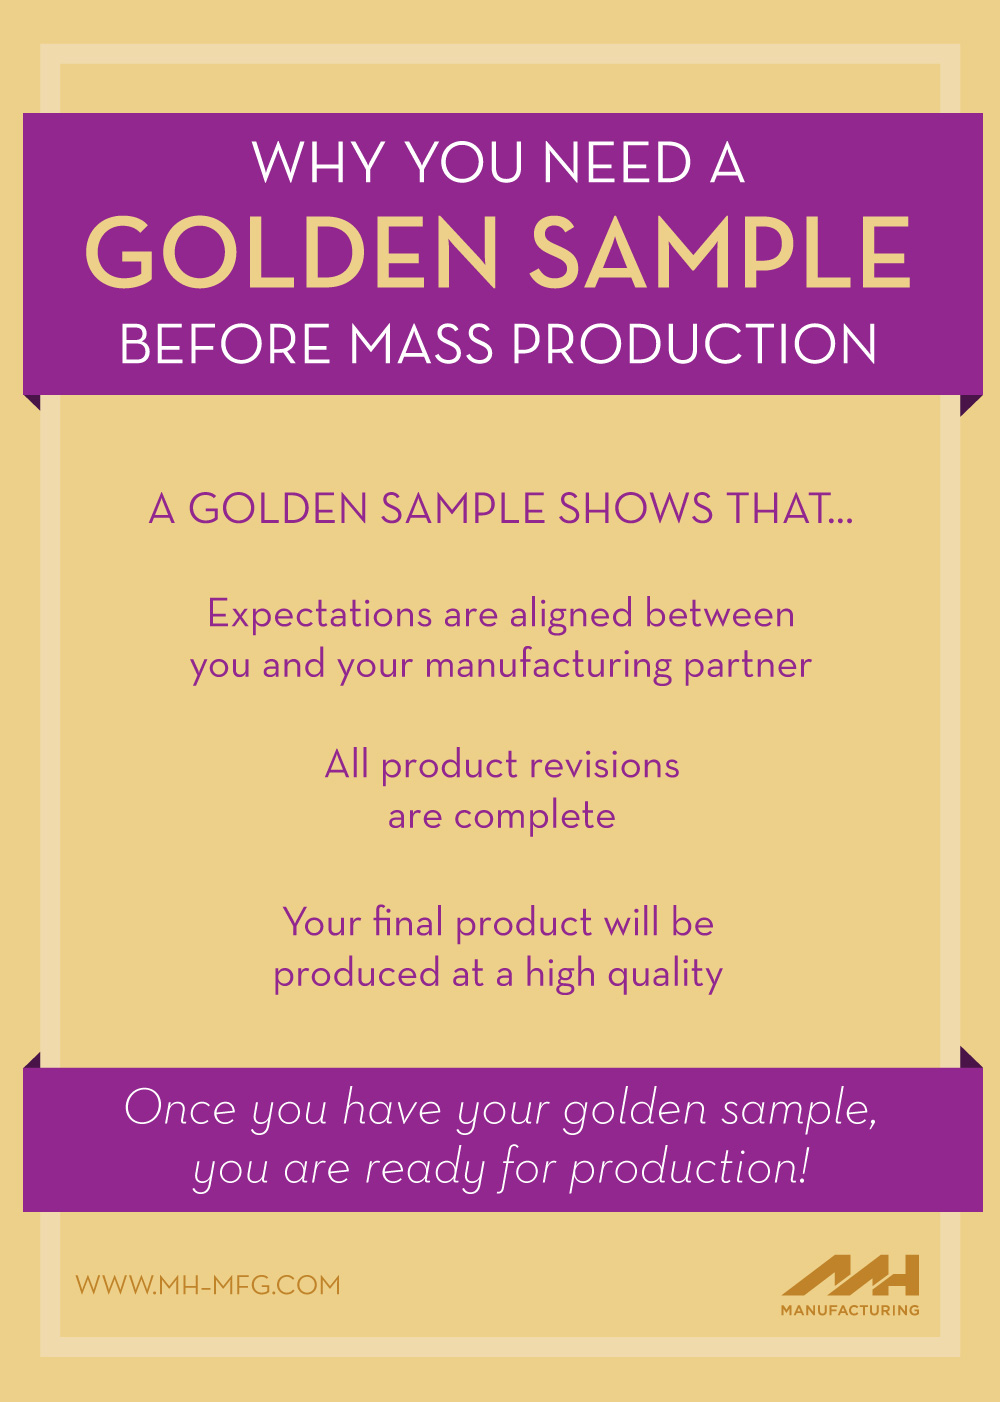 Why You Need a Golden Sample before Mass Production